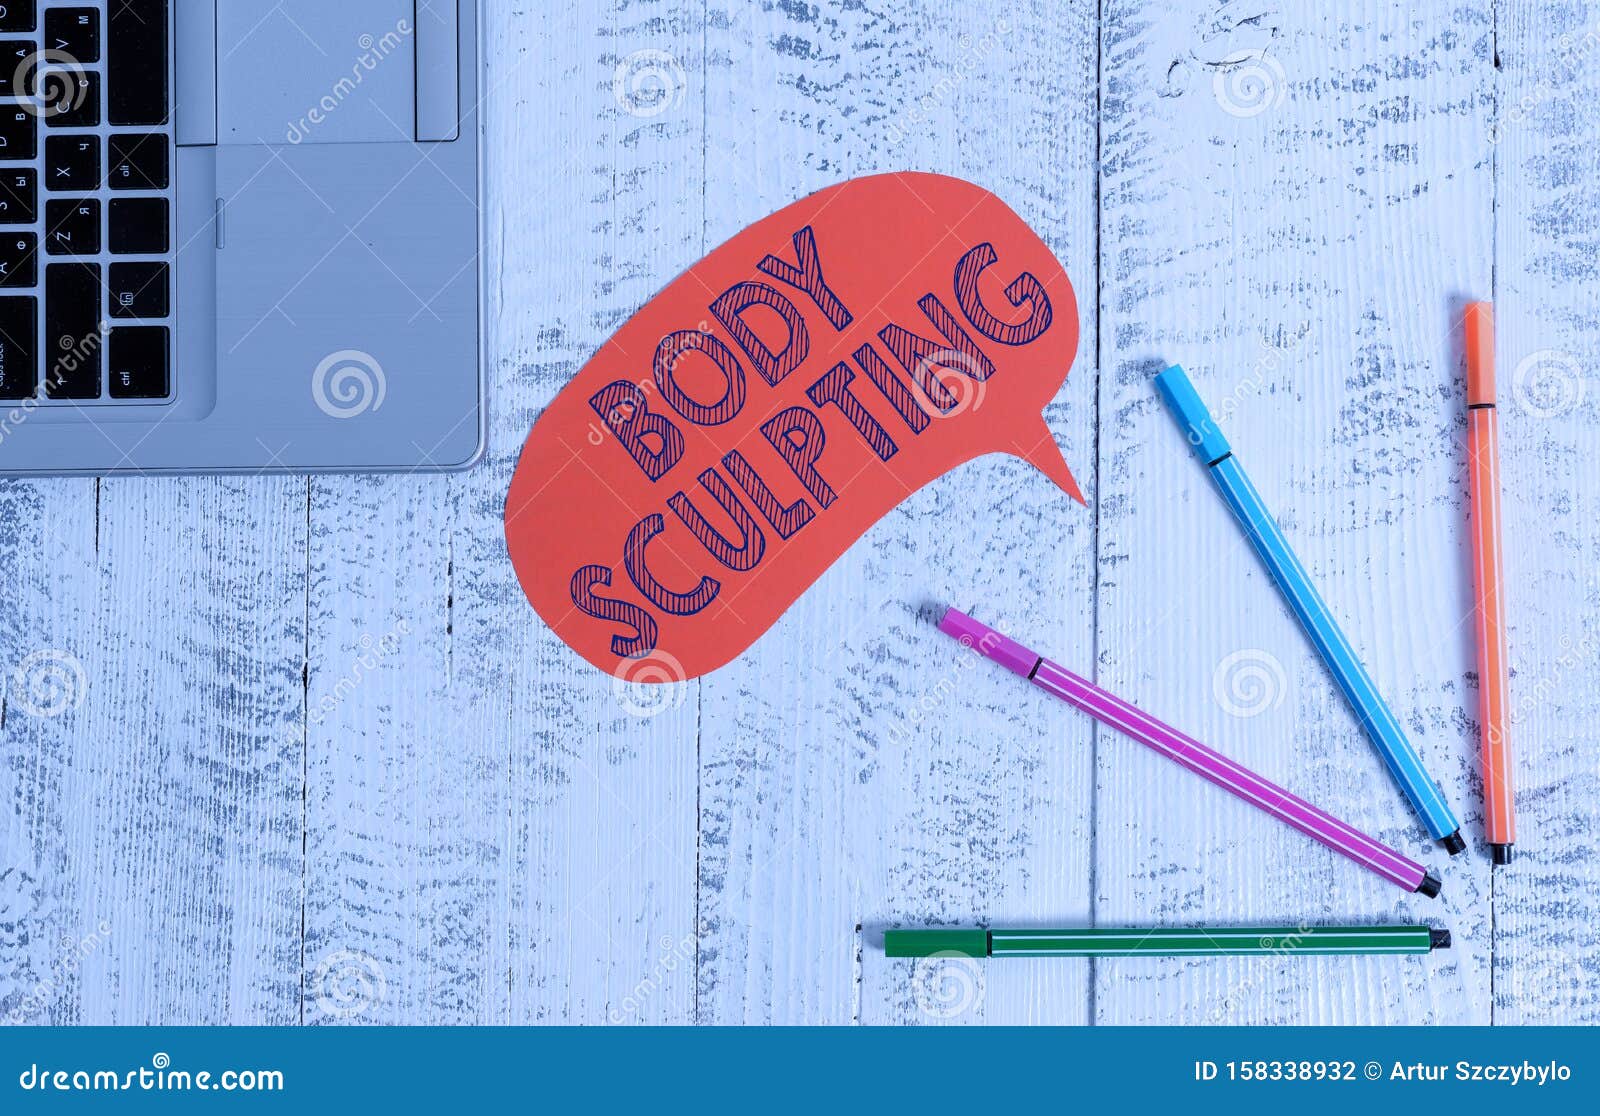 https://thumbs.dreamstime.com/z/handwriting-text-writing-body-sculpting-conceptual-photo-activity-increasing-body-s-visible-muscle-tone-open-laptop-158338932.jpg